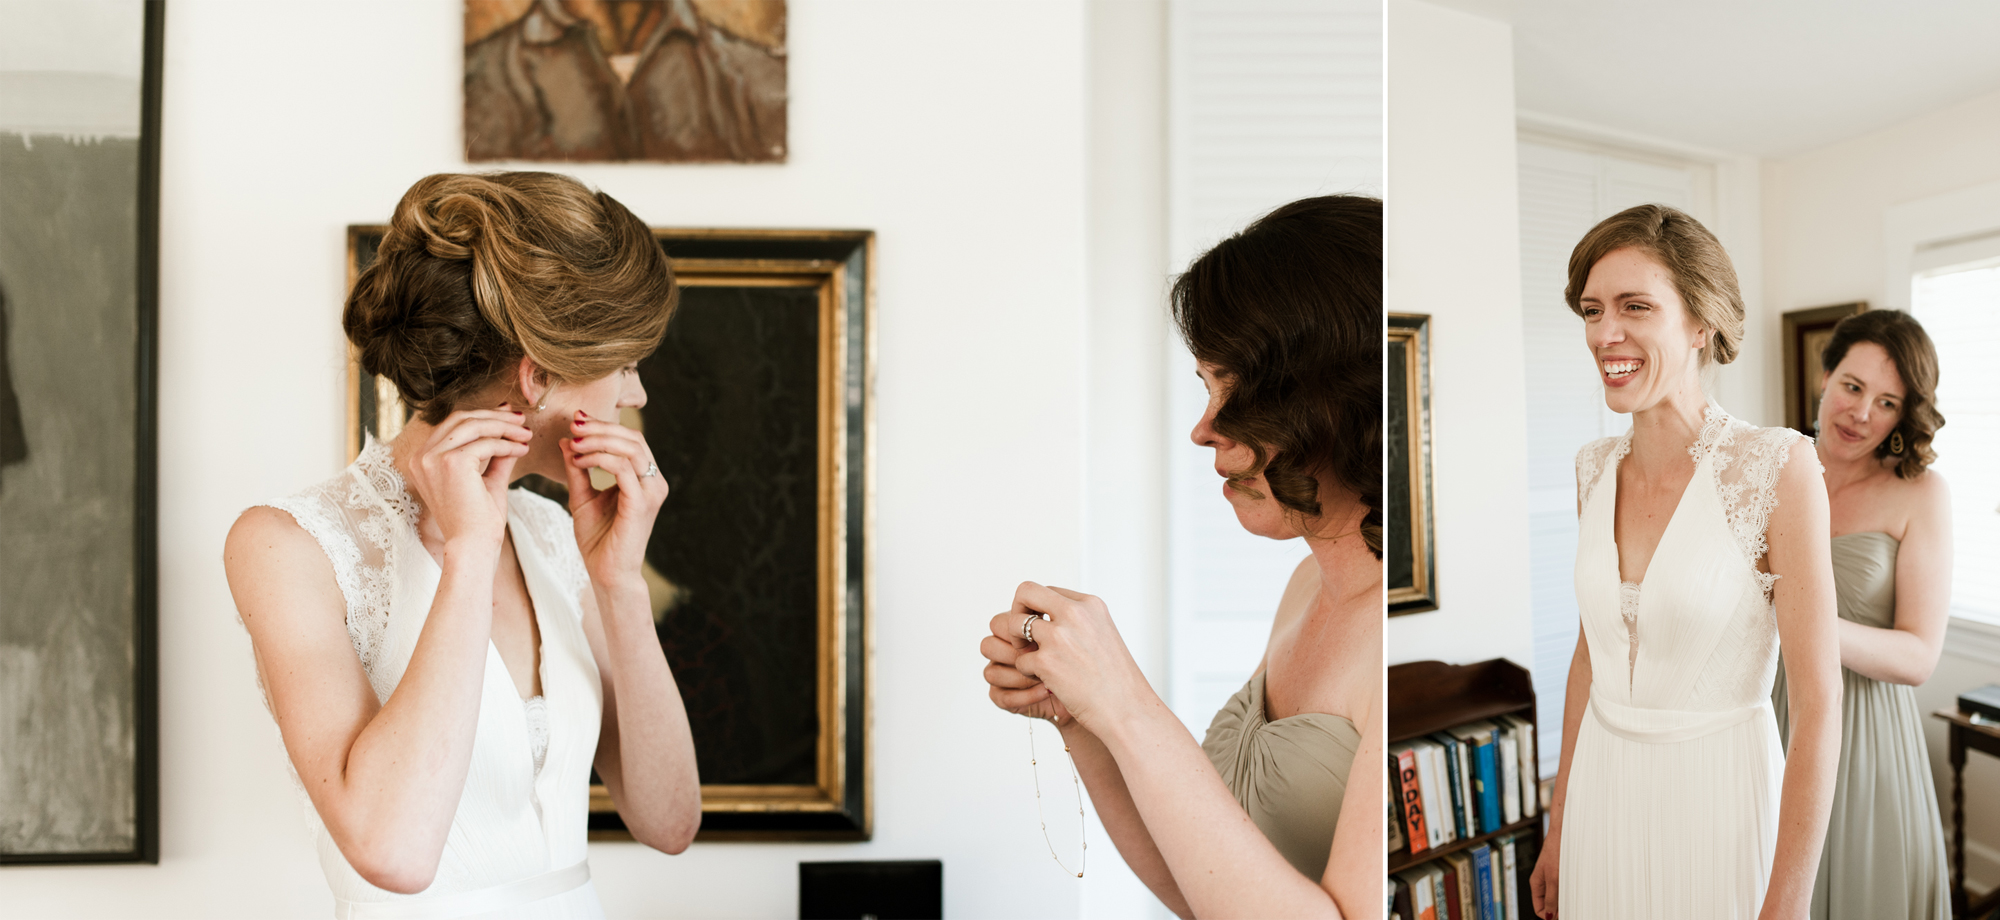 The bride gets ready at the Portland Mayor's Mansion. By Laurelhurst Park wedding photographer Briana Morrison